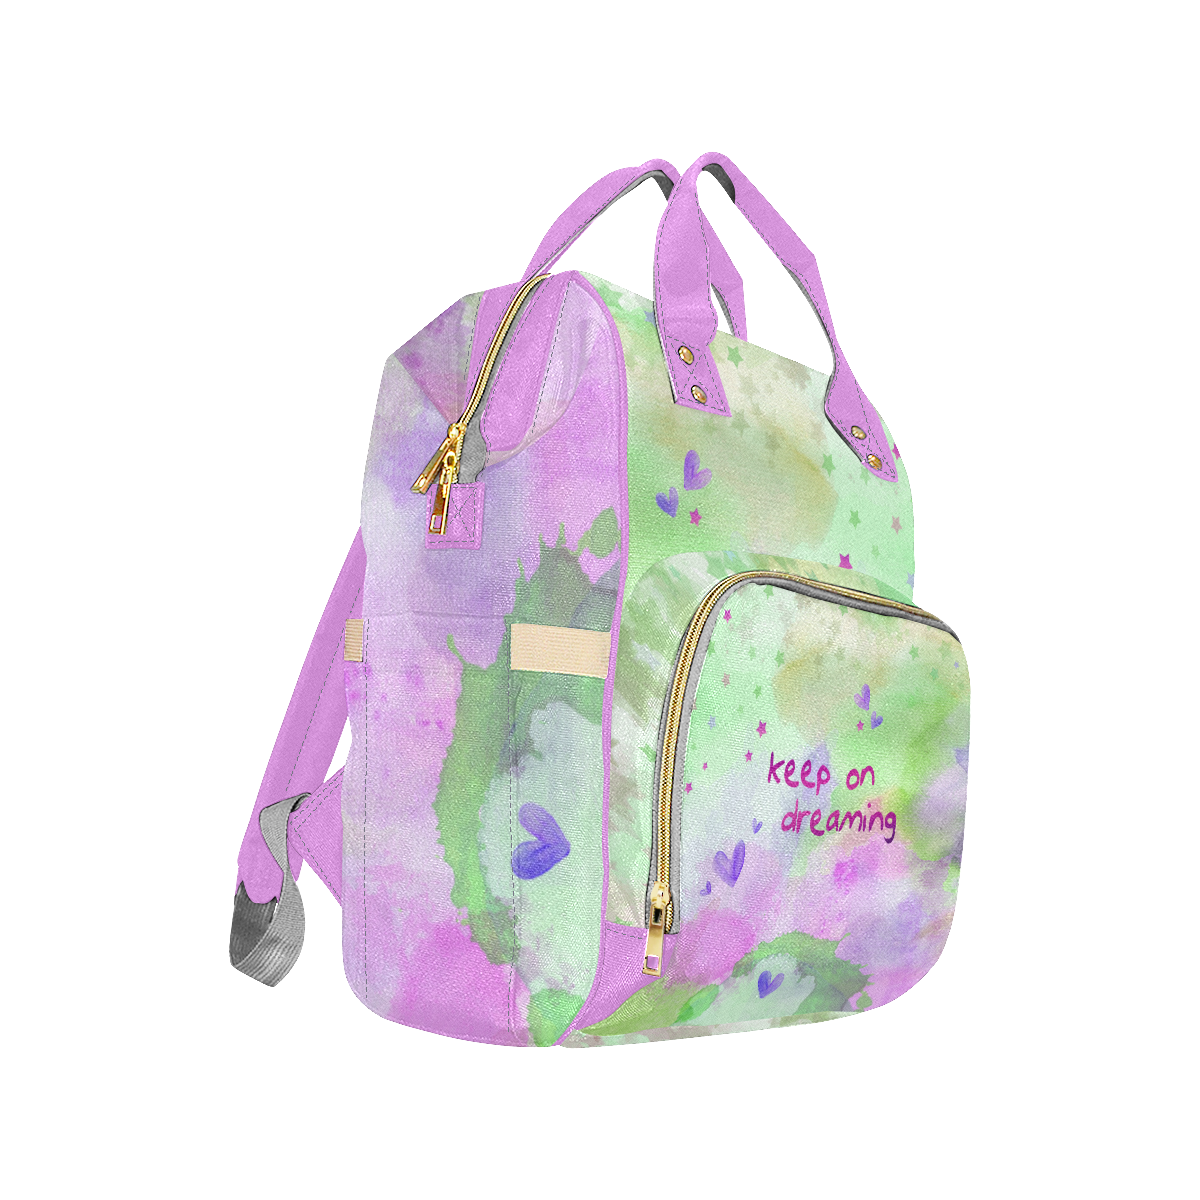 KEEP ON DREAMING - lilac and green Multi-Function Diaper Backpack/Diaper Bag (Model 1688)